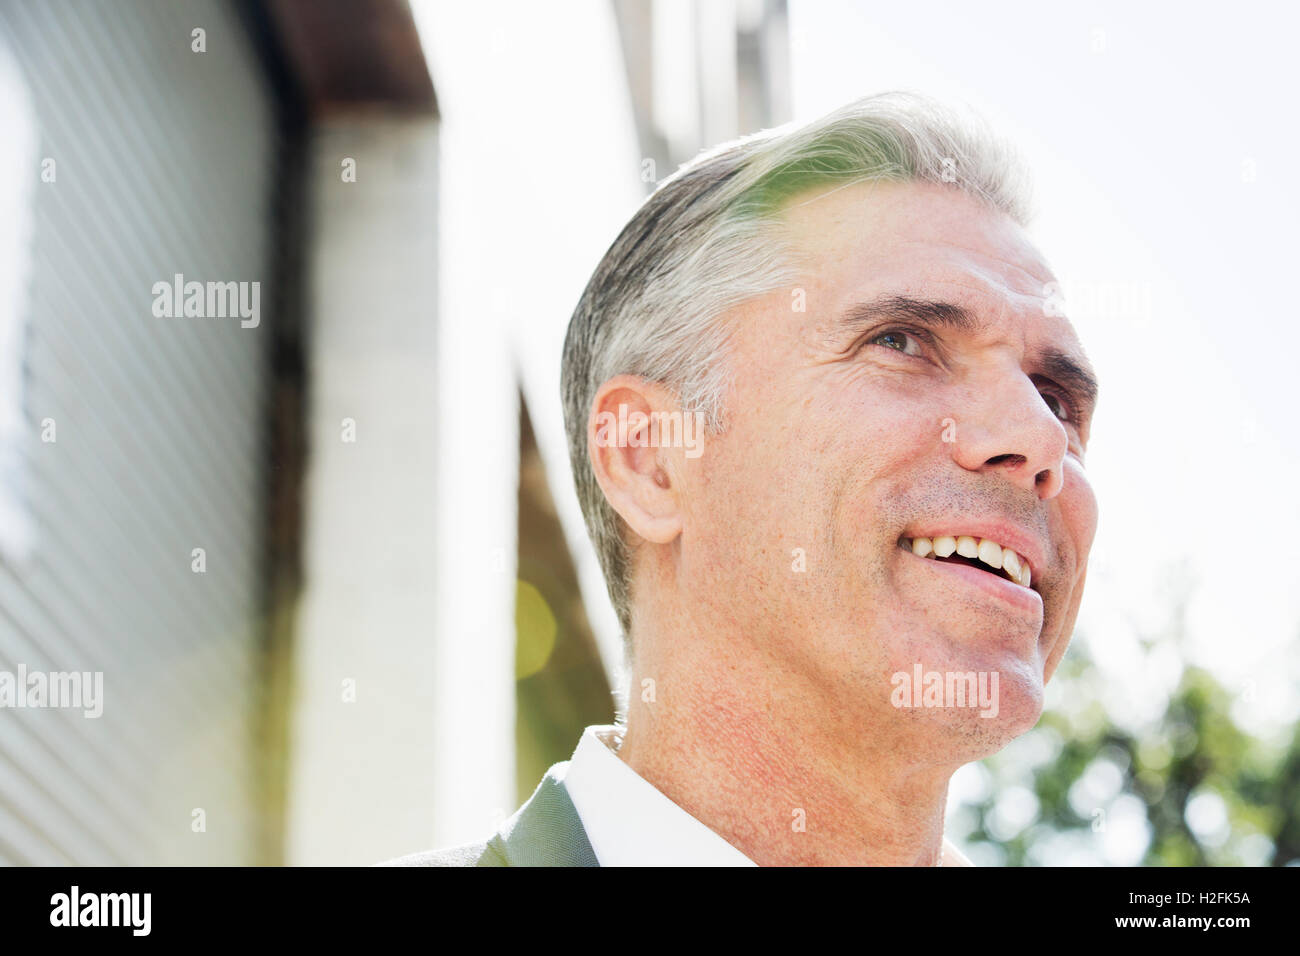 A man with grey hair standing on a street looking up and smiling confidently, looking up view from below. Stock Photo